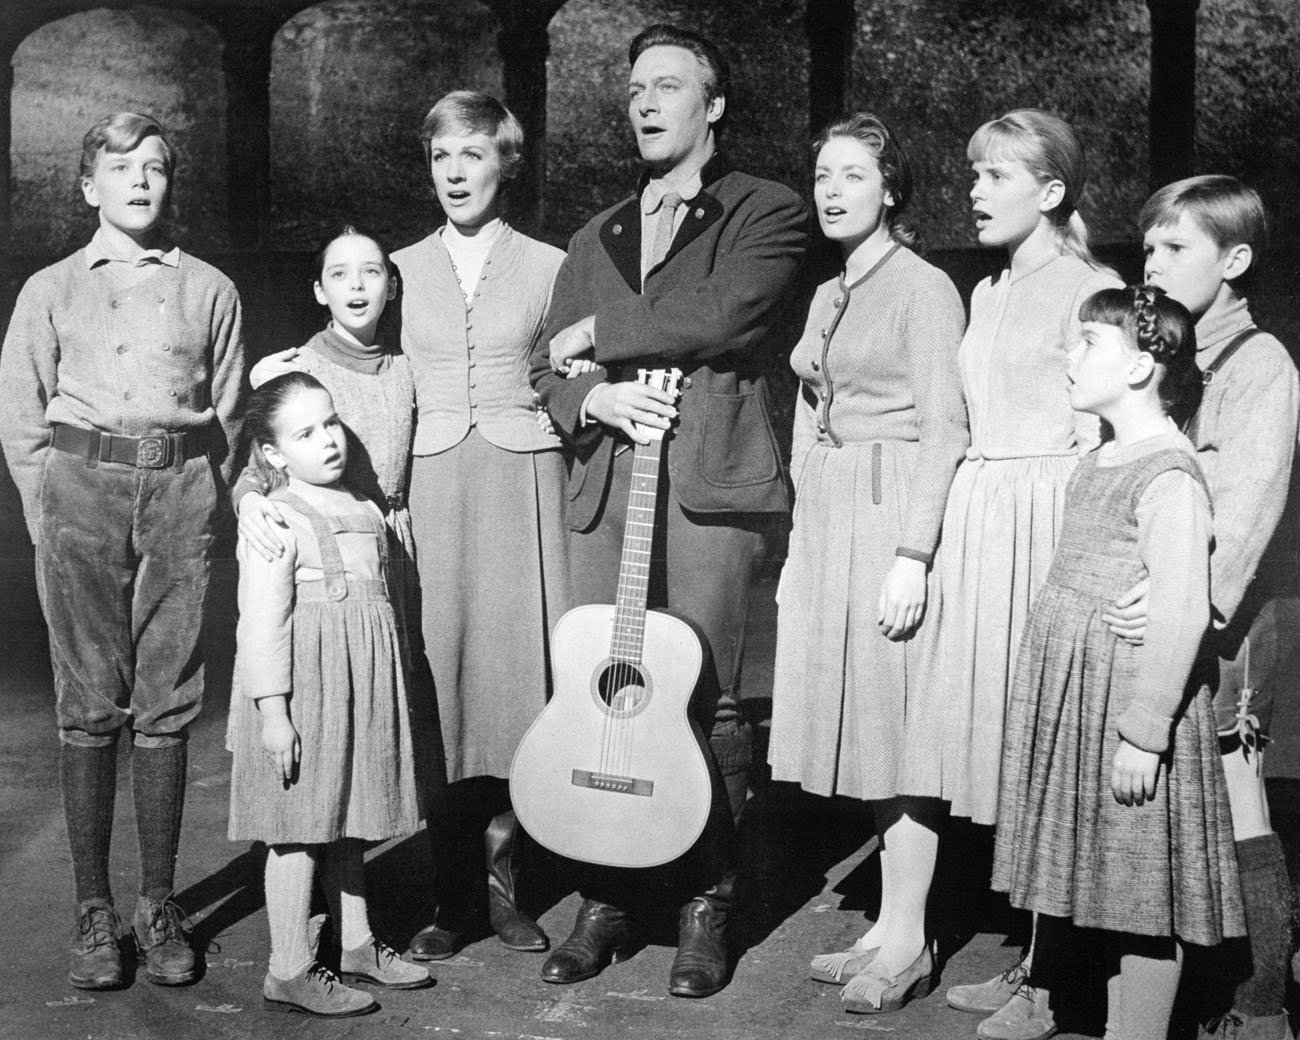 The Sound of Music cast singing in a black and white photo